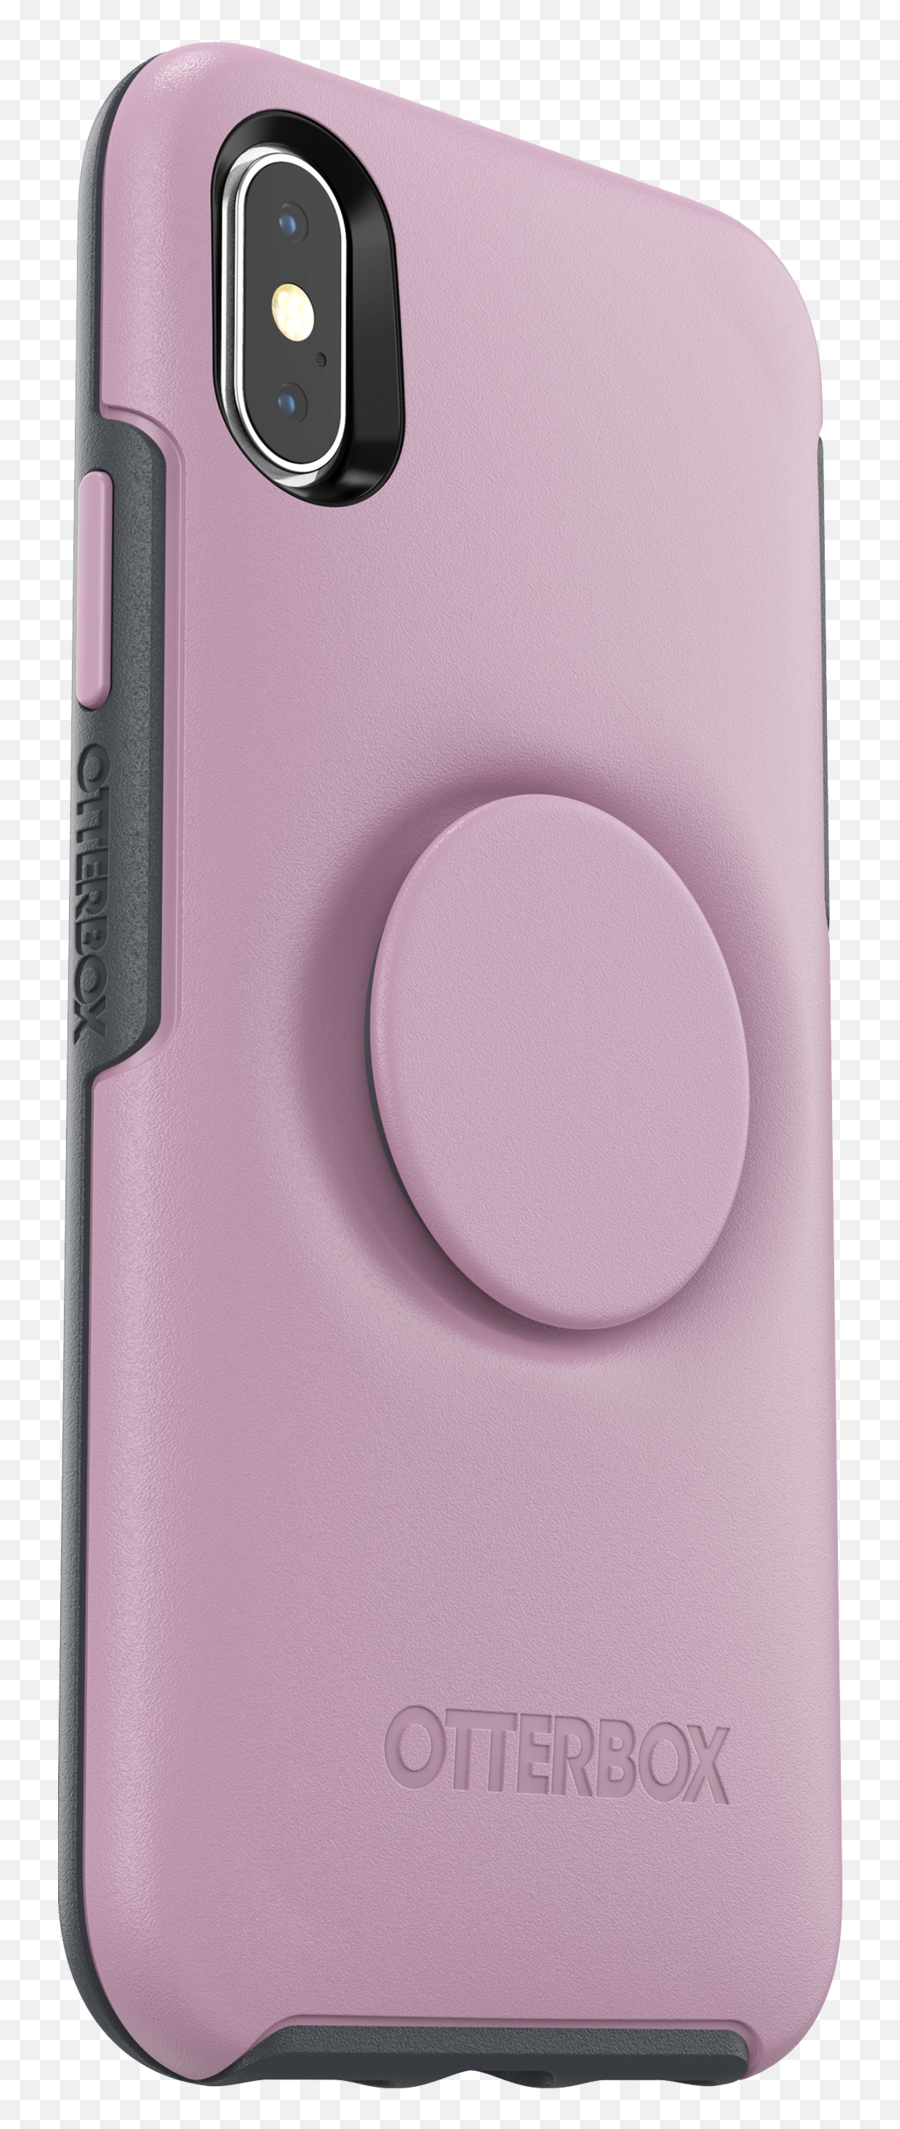 Otterbox And Popsockets Made A New Case And It Needs To - Otterbox Popsocket Case Emoji,Otterbox Iphone 5 Emojis